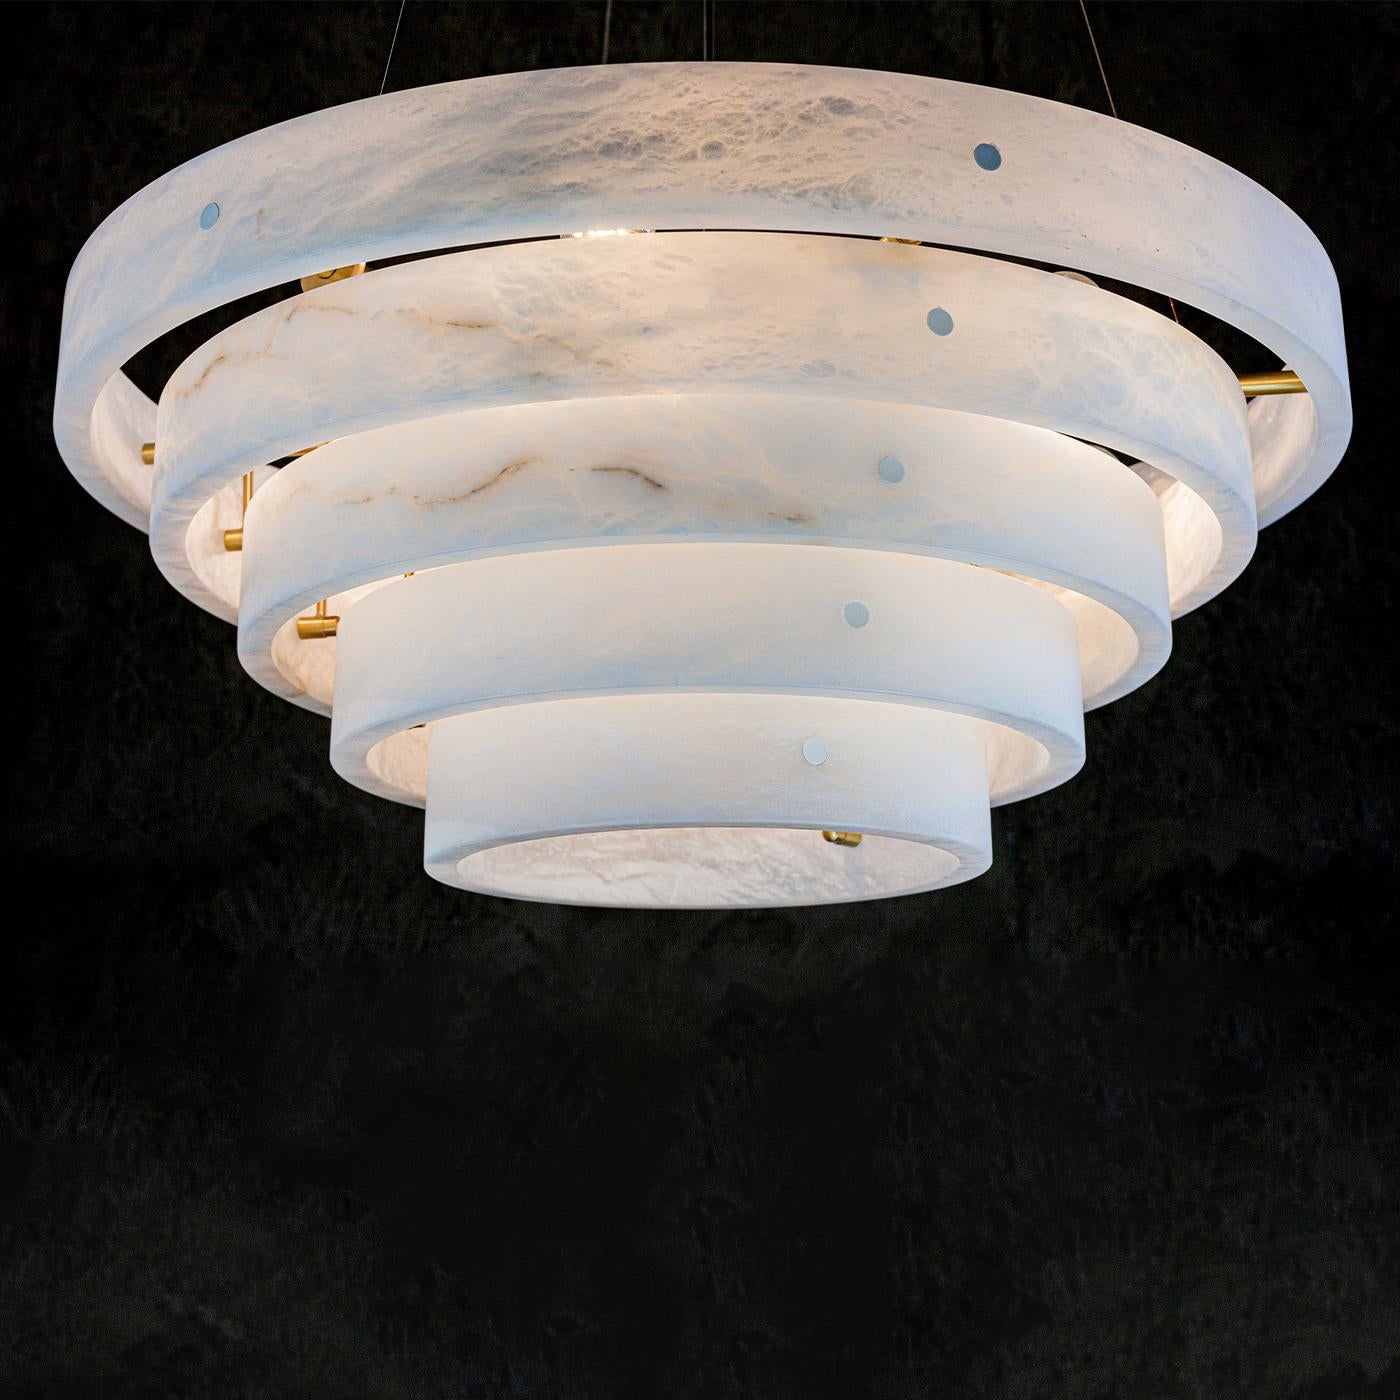 Natural alabaster suspension lamp, comprising 5 rings of different sizes, ranging from 30 cm to 70 cm. Each ring sets itself apart from the others due to the veins that graduate from white to brown. This distinctive feature bestows uniqueness upon